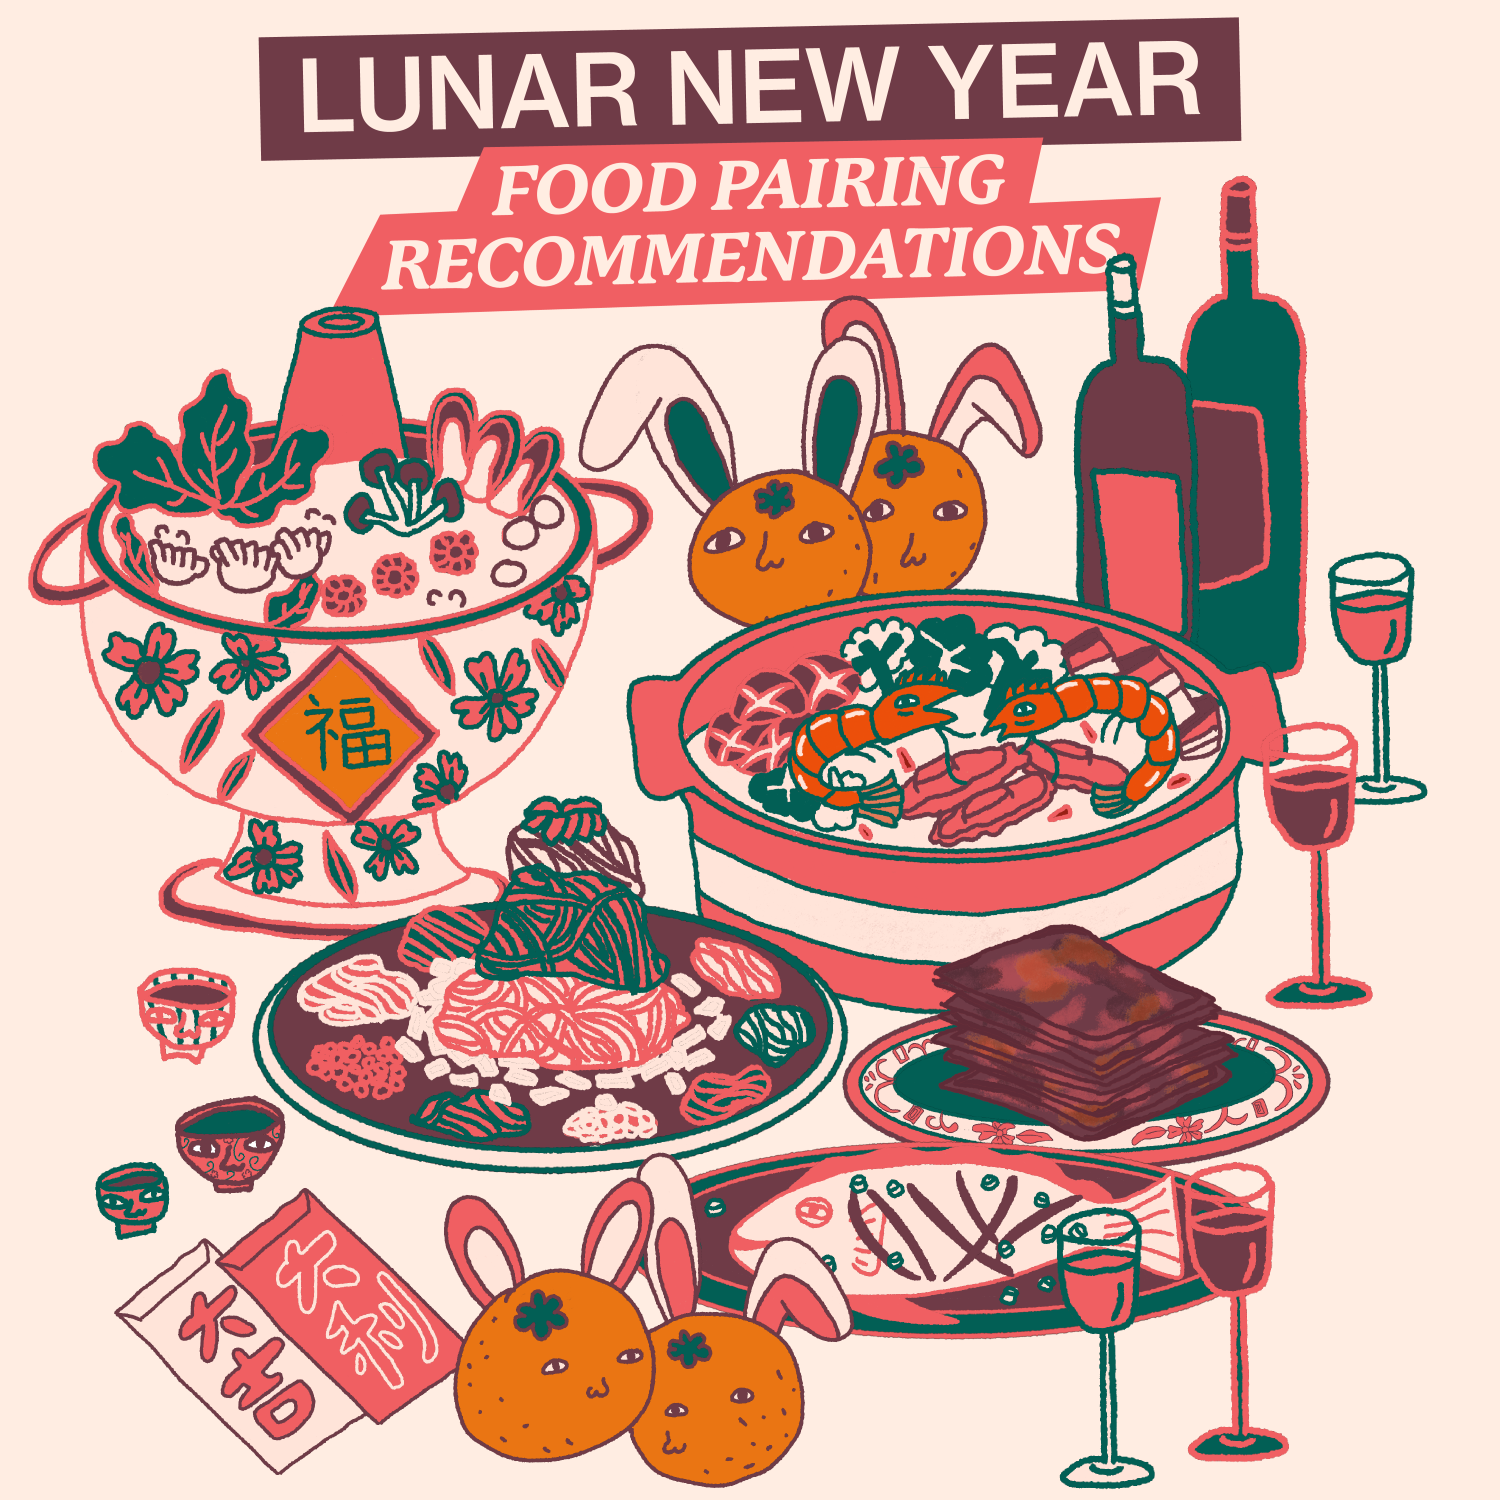 Feast & Wine your way in 兔 the Lunar New Year